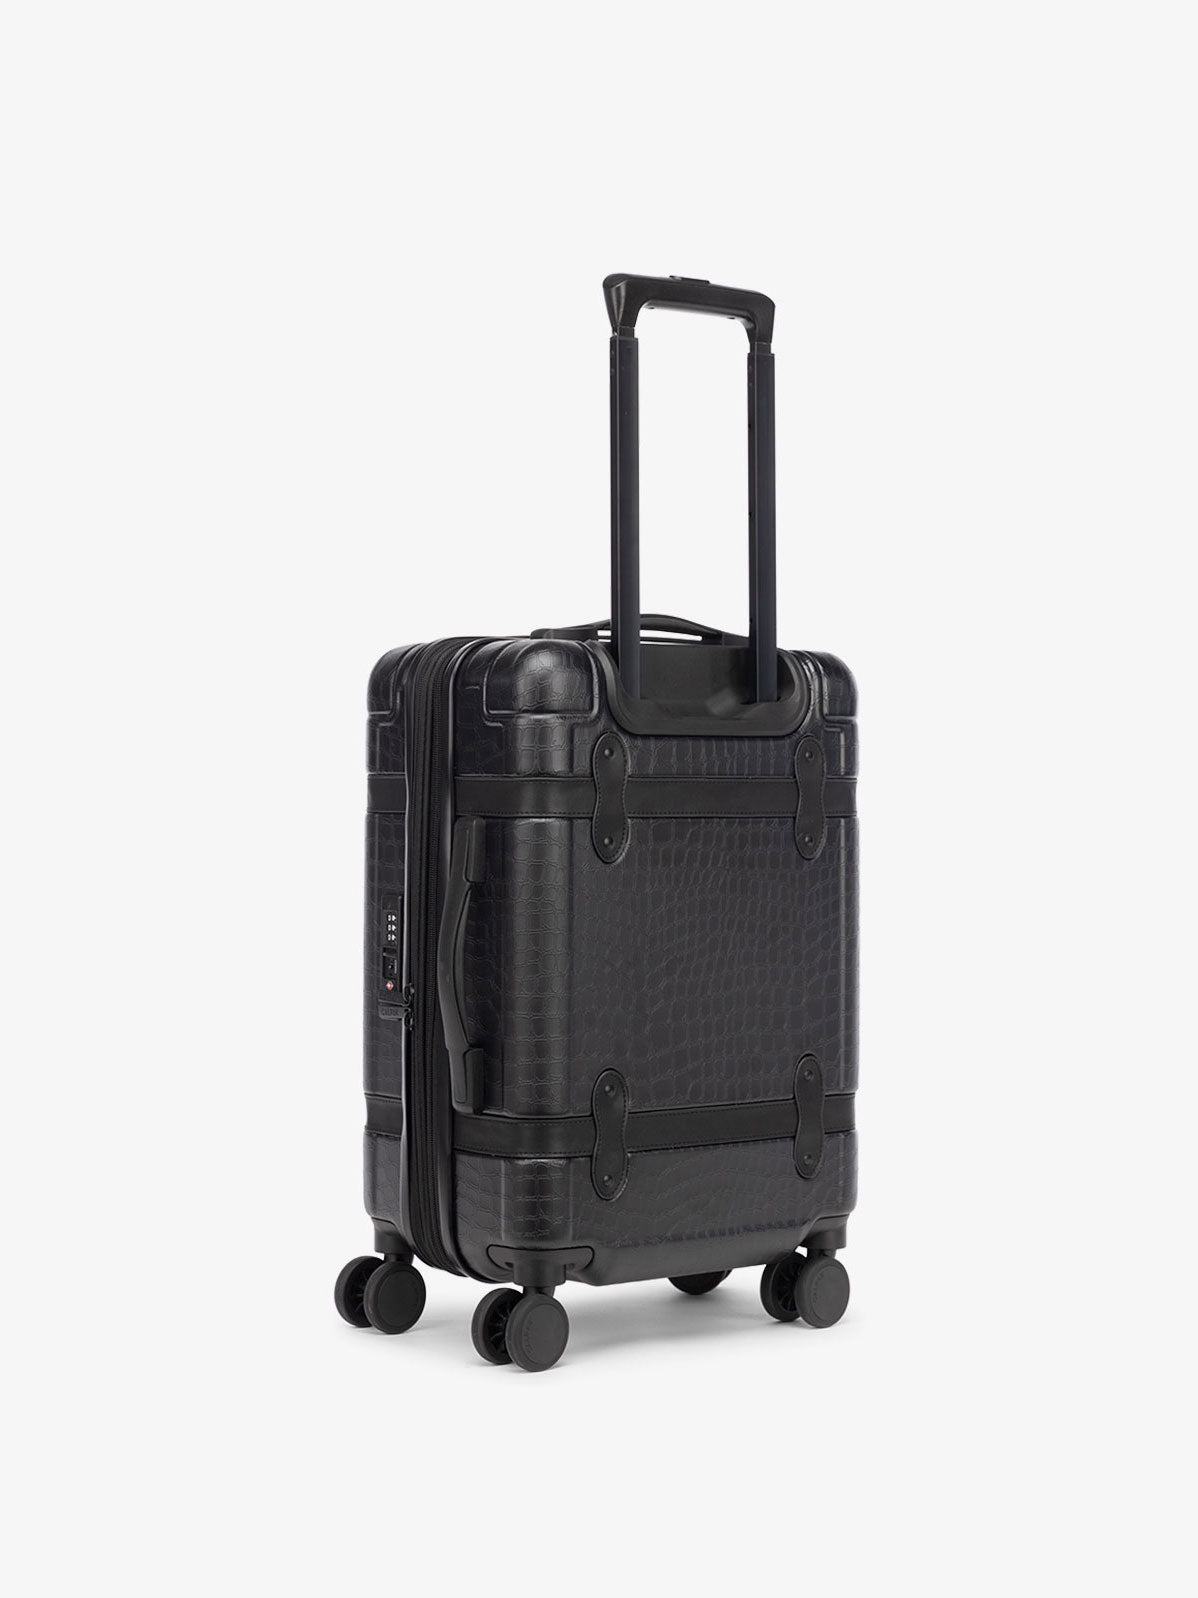 trnk carry-on luggage with spinner wheels